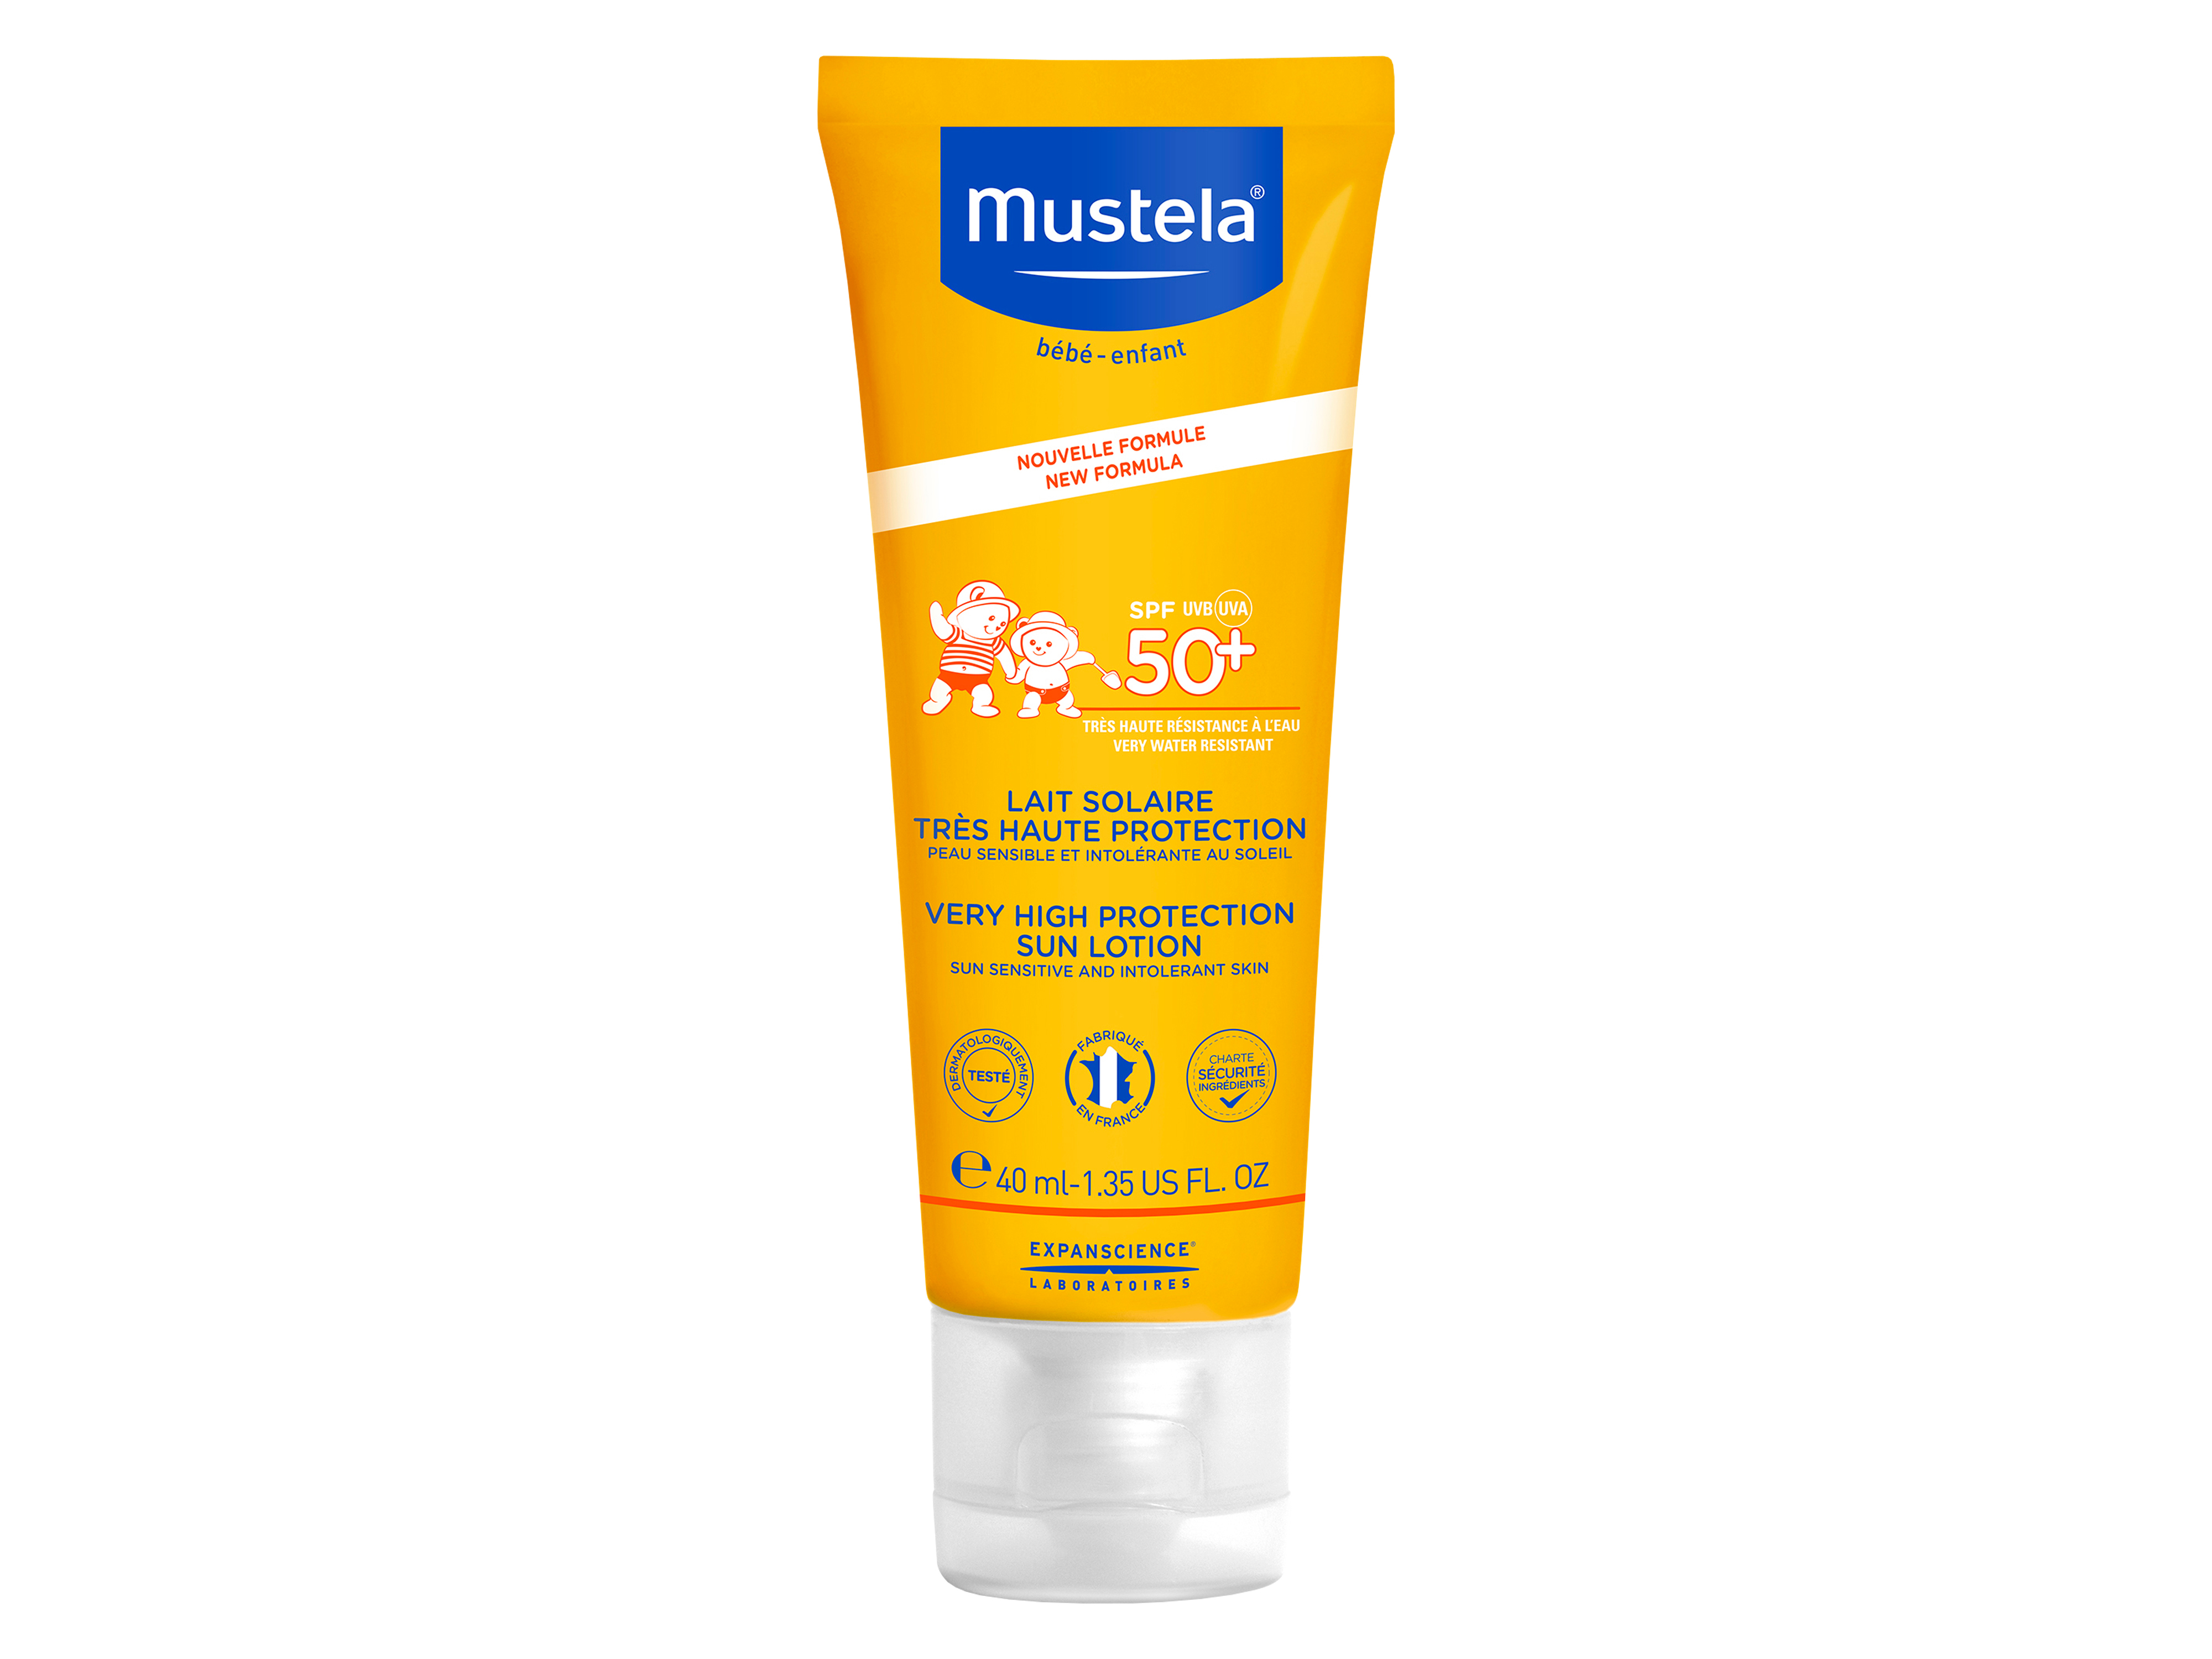 Mustela Very High Protection Face Sun Lotion SPF50+, 40 ml